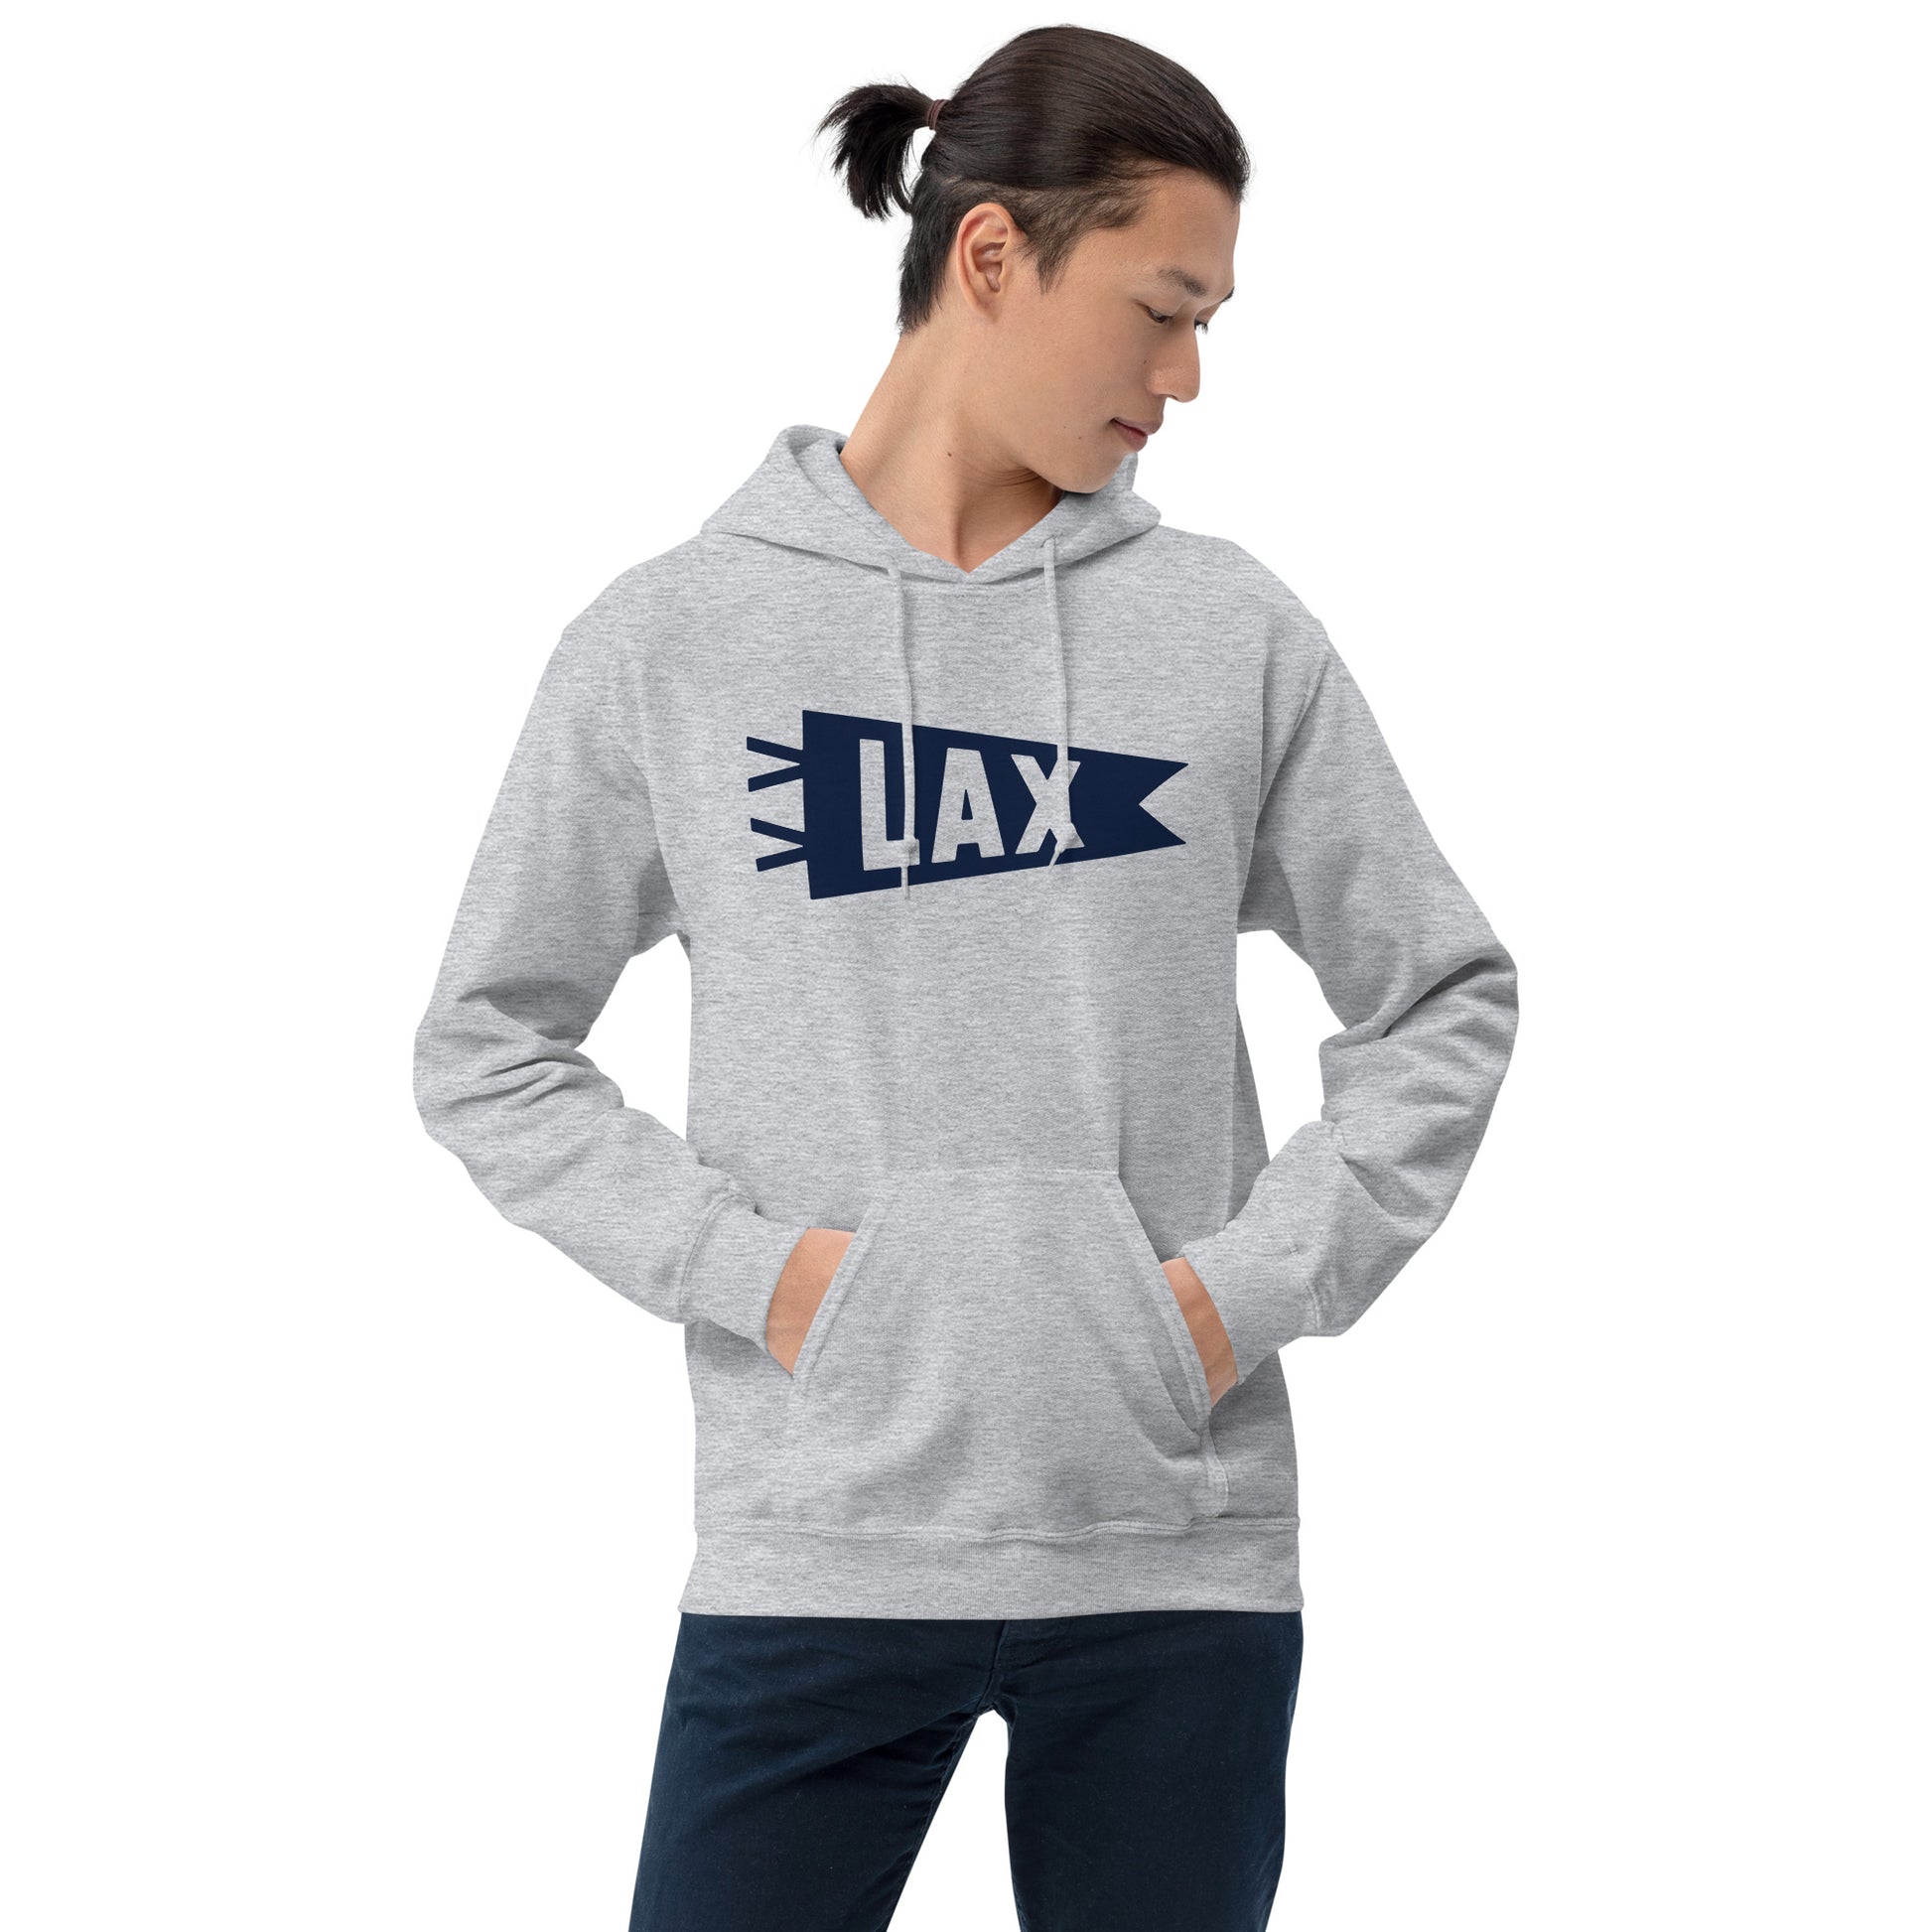 Airport Code Unisex Hoodie - Navy Blue Graphic • LAX Los Angeles • YHM Designs - Image 07